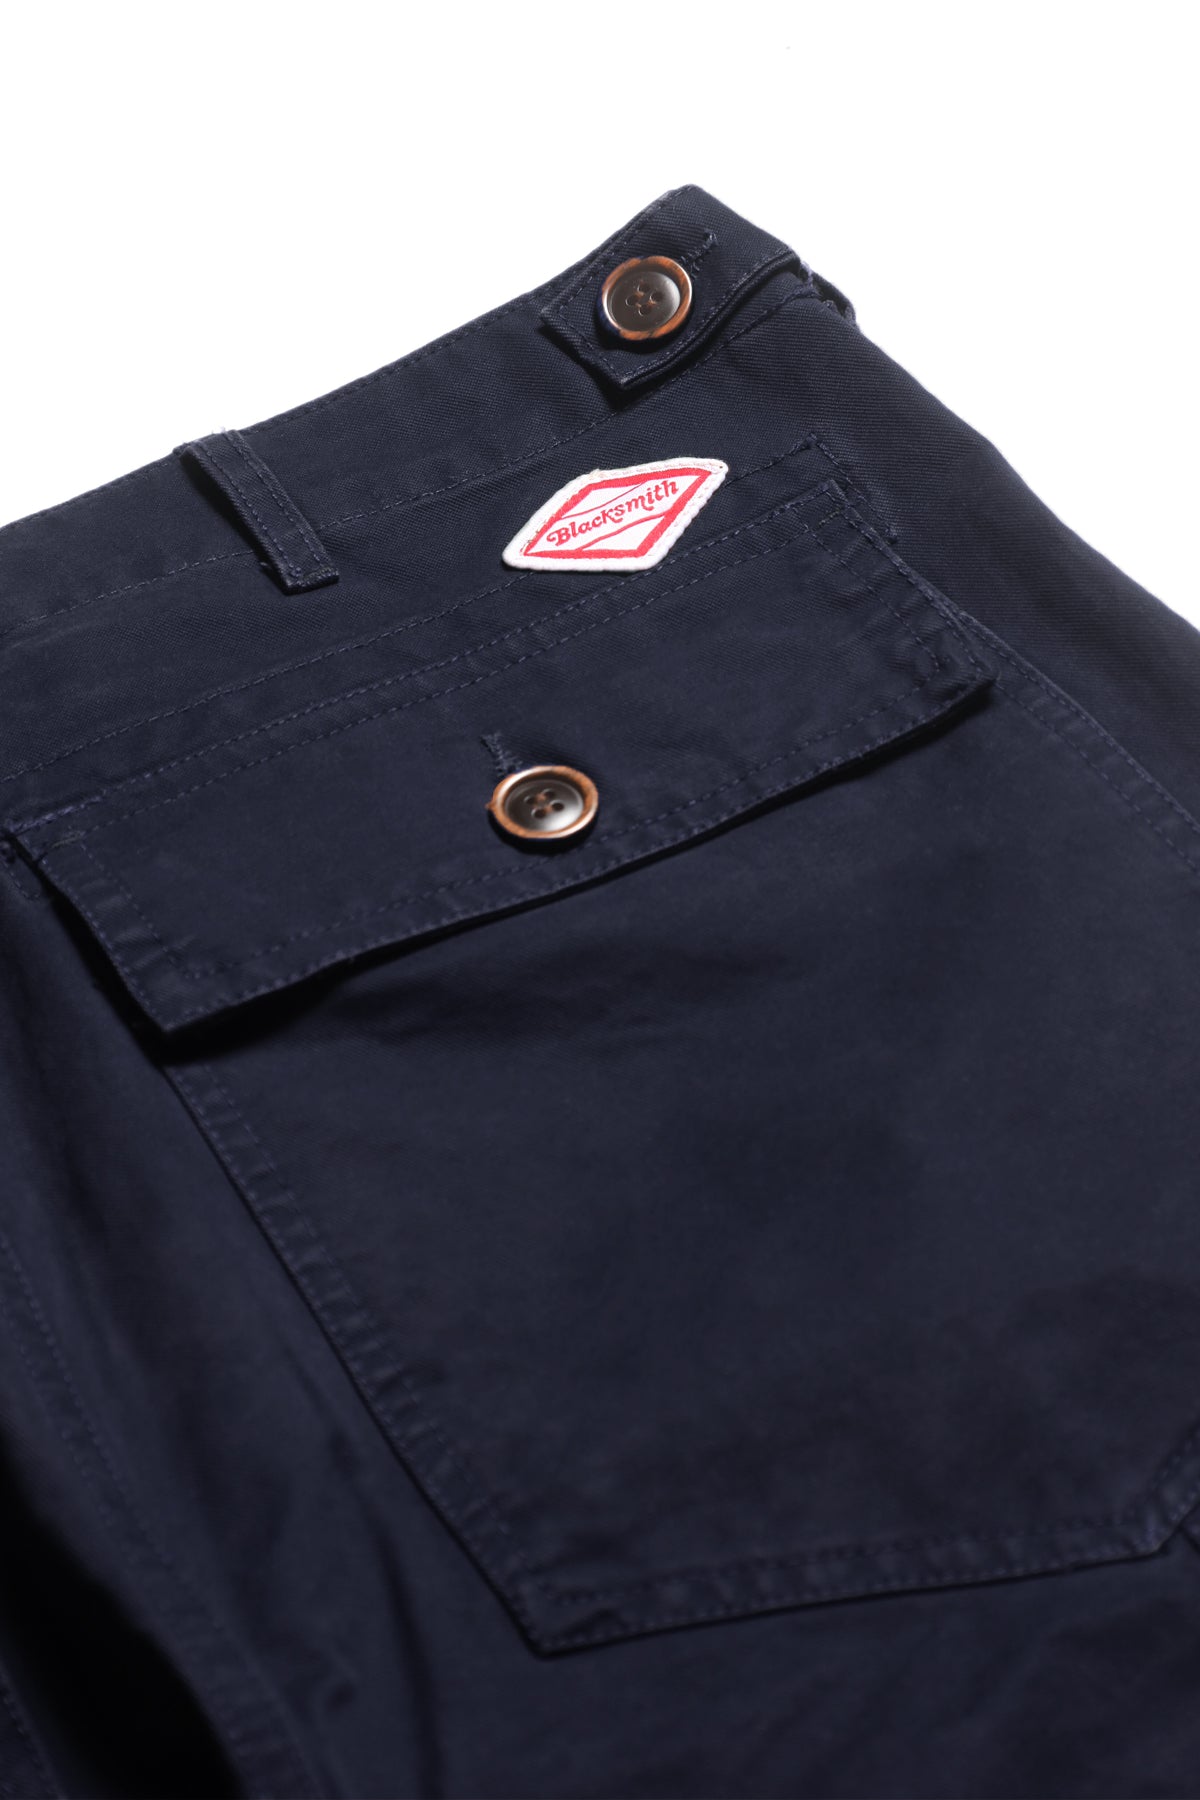 Blacksmith - Sowing Field Pants - Navy